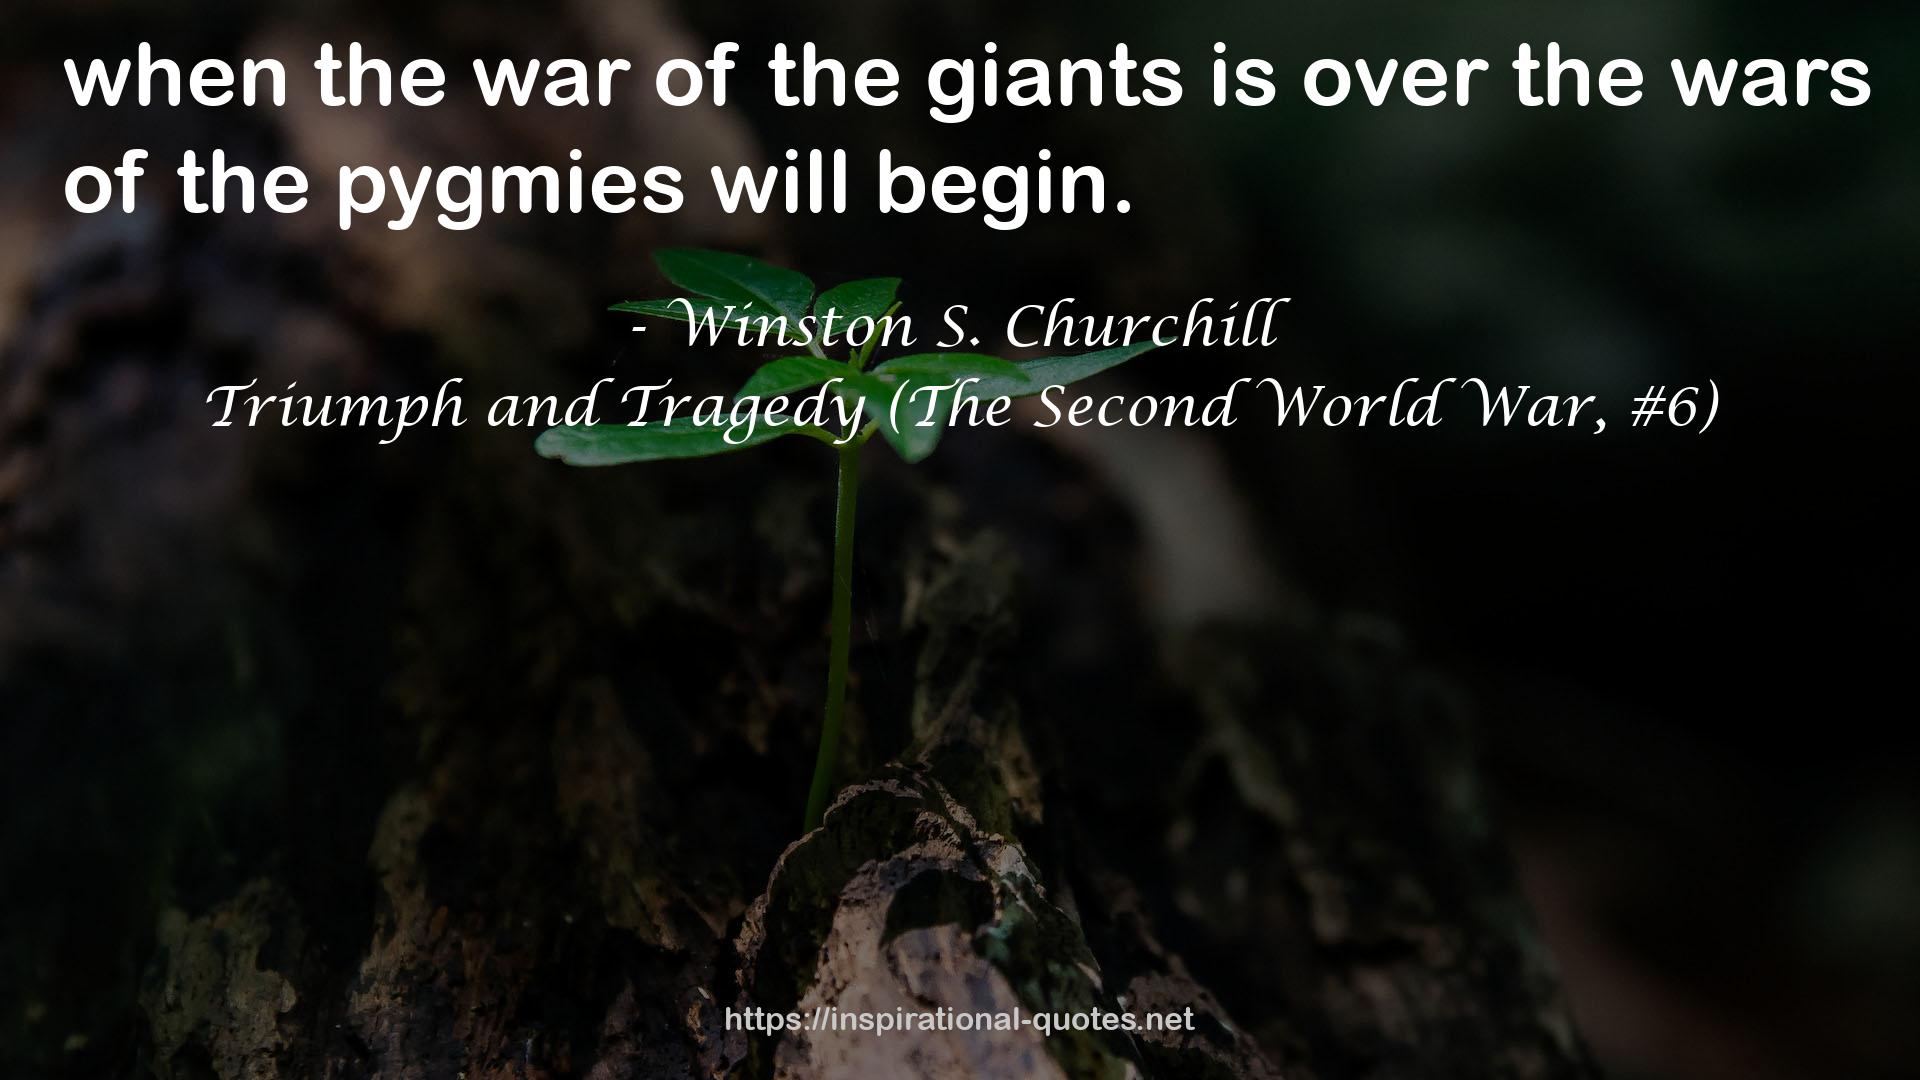 Triumph and Tragedy (The Second World War, #6) QUOTES